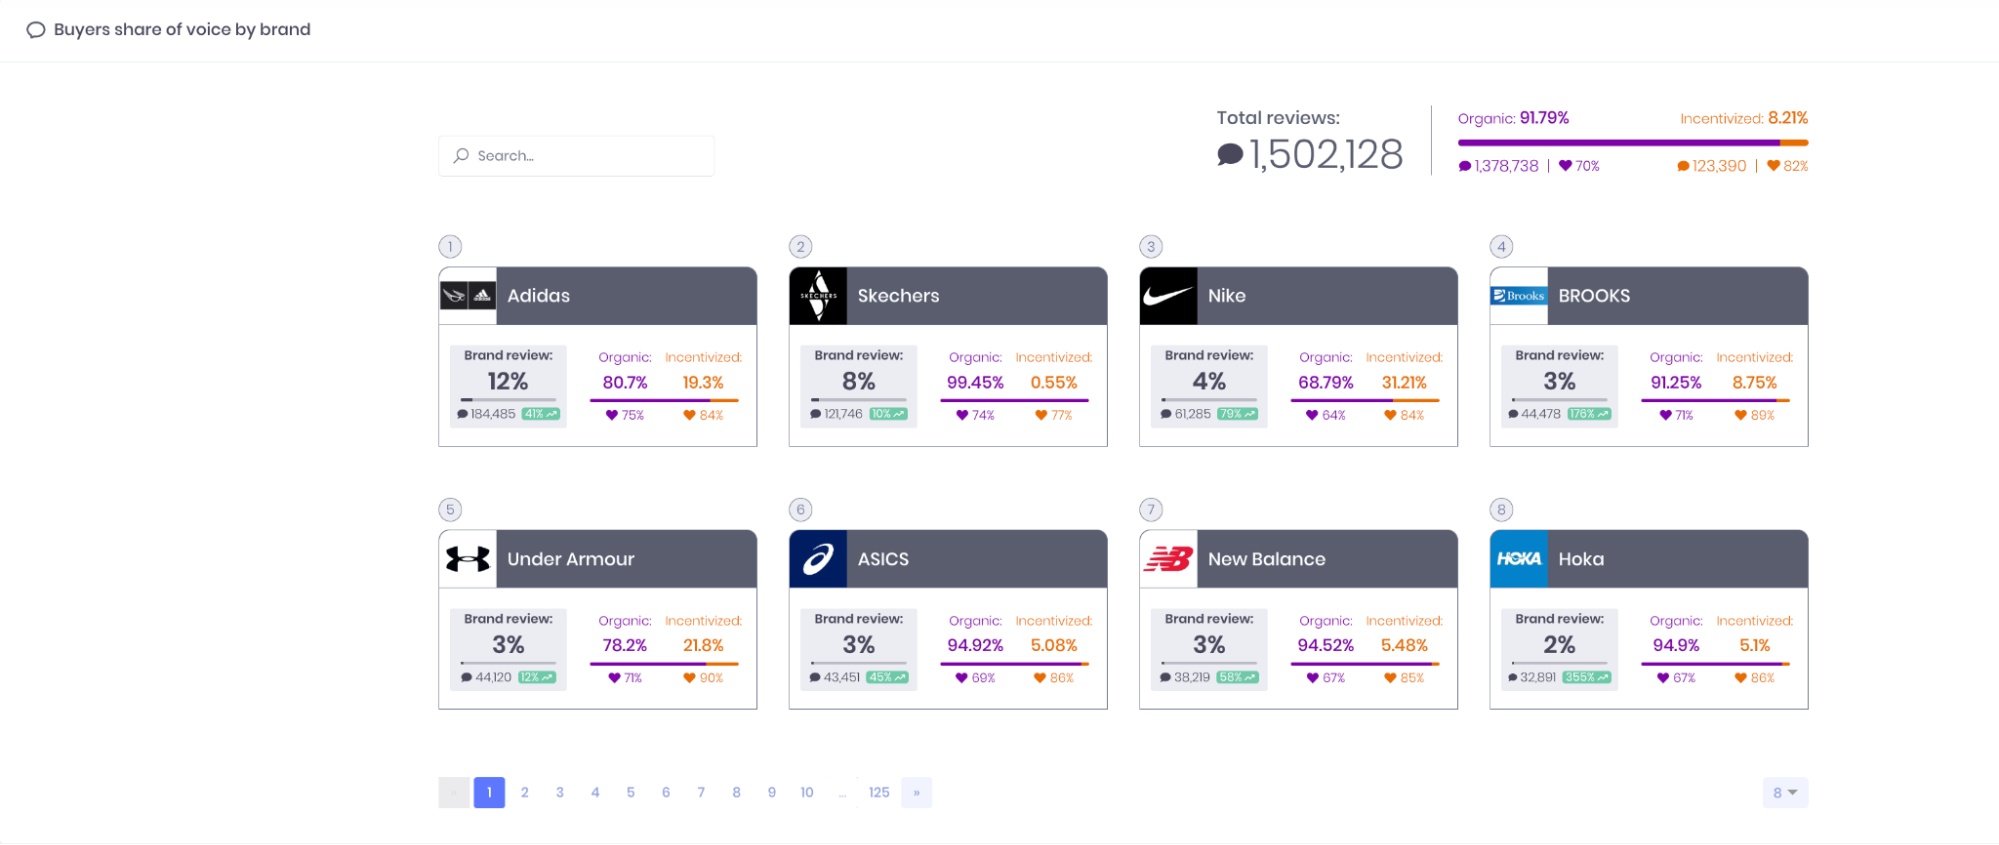 Footwear brands with the most discussion volume or share of voice. The data is divided into organic and incentivized reviews.